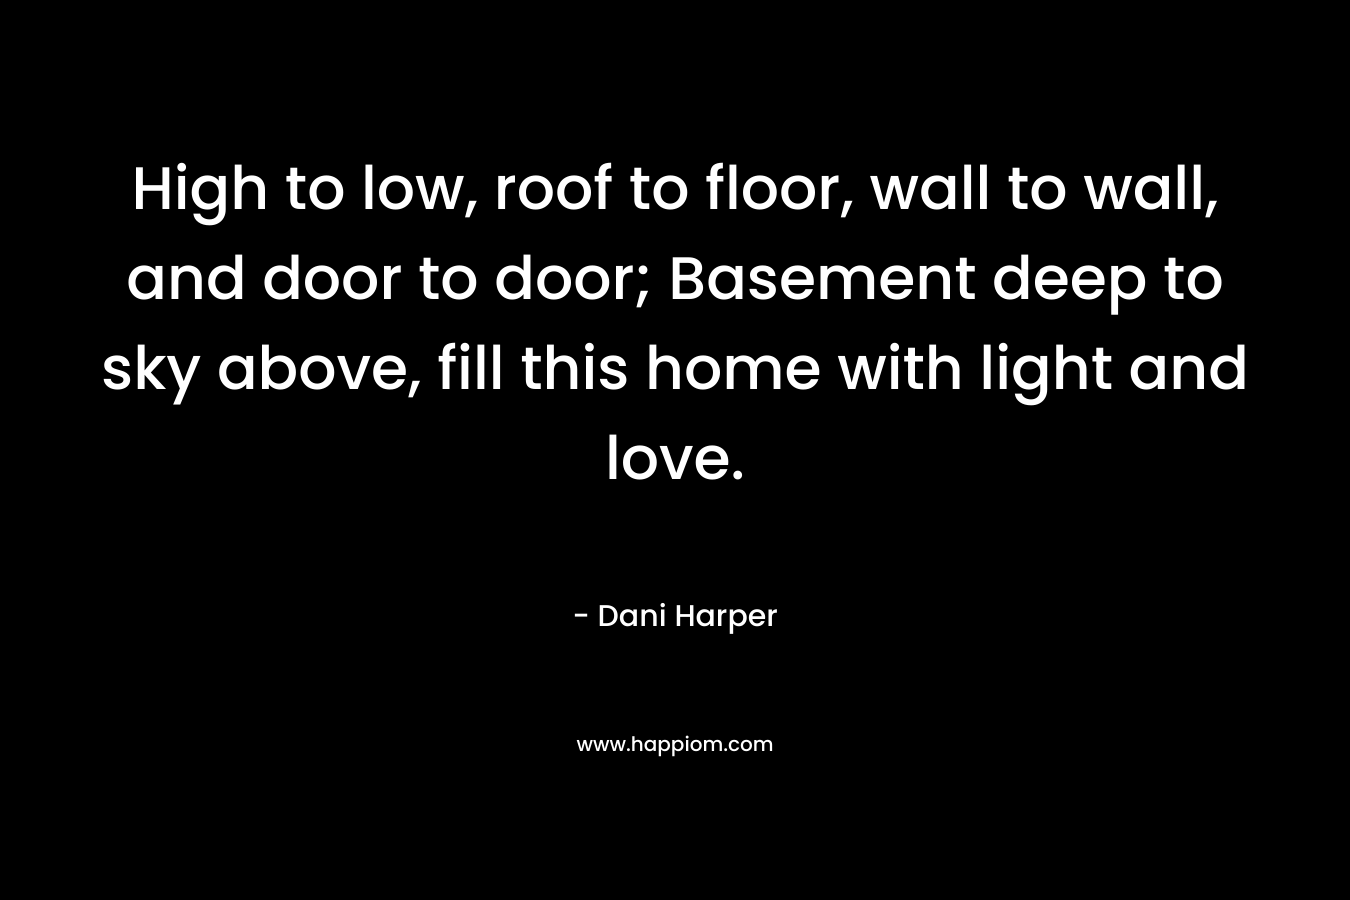 High to low, roof to floor, wall to wall, and door to door; Basement deep to sky above, fill this home with light and love. – Dani Harper